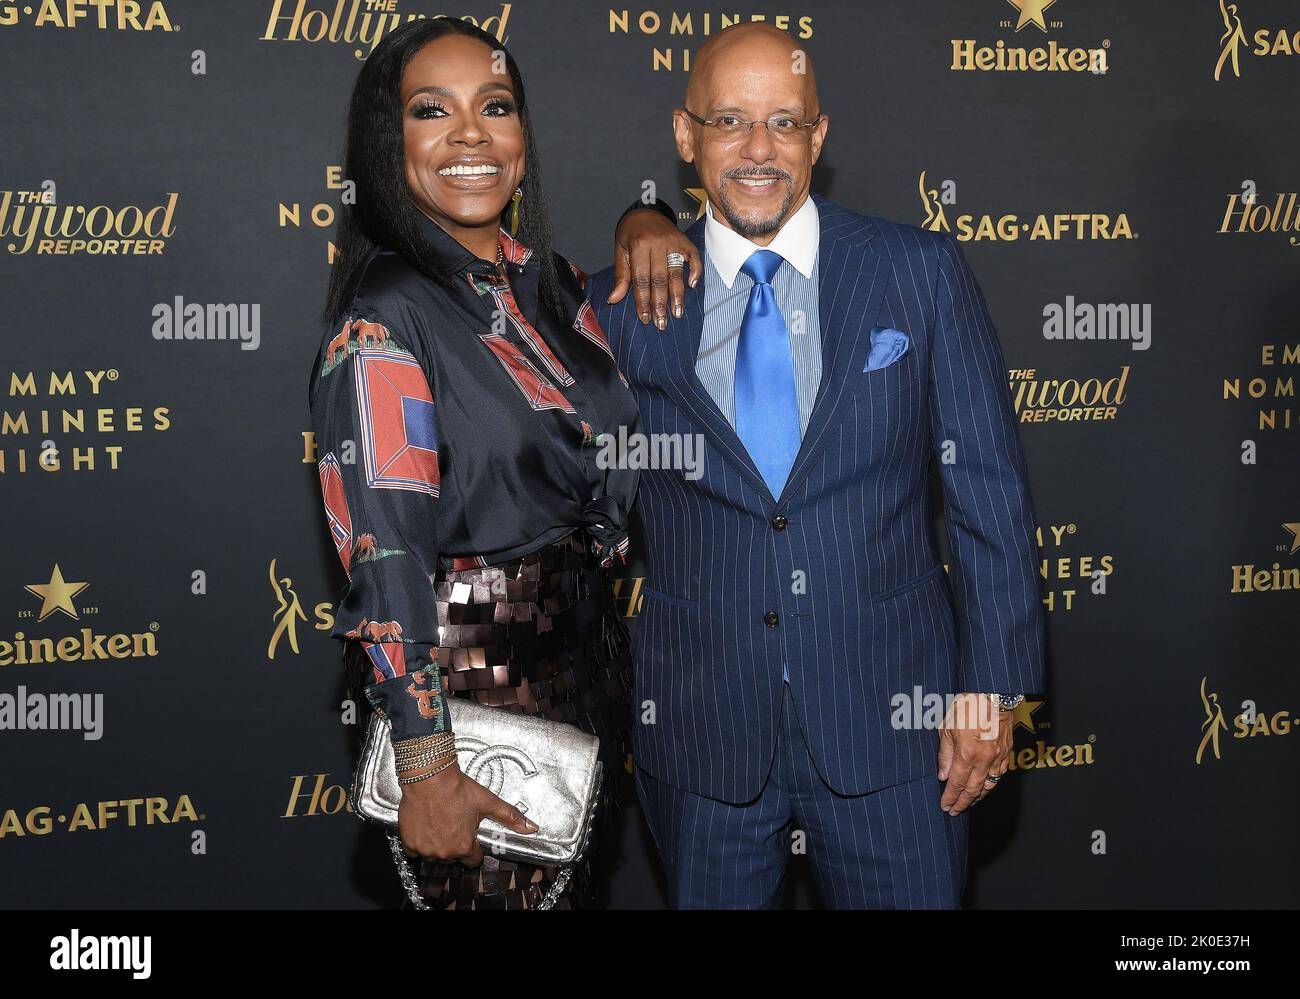 Los Angeles, USA. 10th Sep, 2022. (L-R) Sheryl Lee Ralph and Vincent J. Hughes at The Hollywood Reporter and SAG-AFTRA's EMMY NOMINEES NIGHT held at the Penthouse at 8899 Beverly in West Hollywood, CA on Saturday, September 10, 2022. (Photo By Sthanlee B. Mirador/Sipa USA) Credit: Sipa USA/Alamy Live News Stock Photo